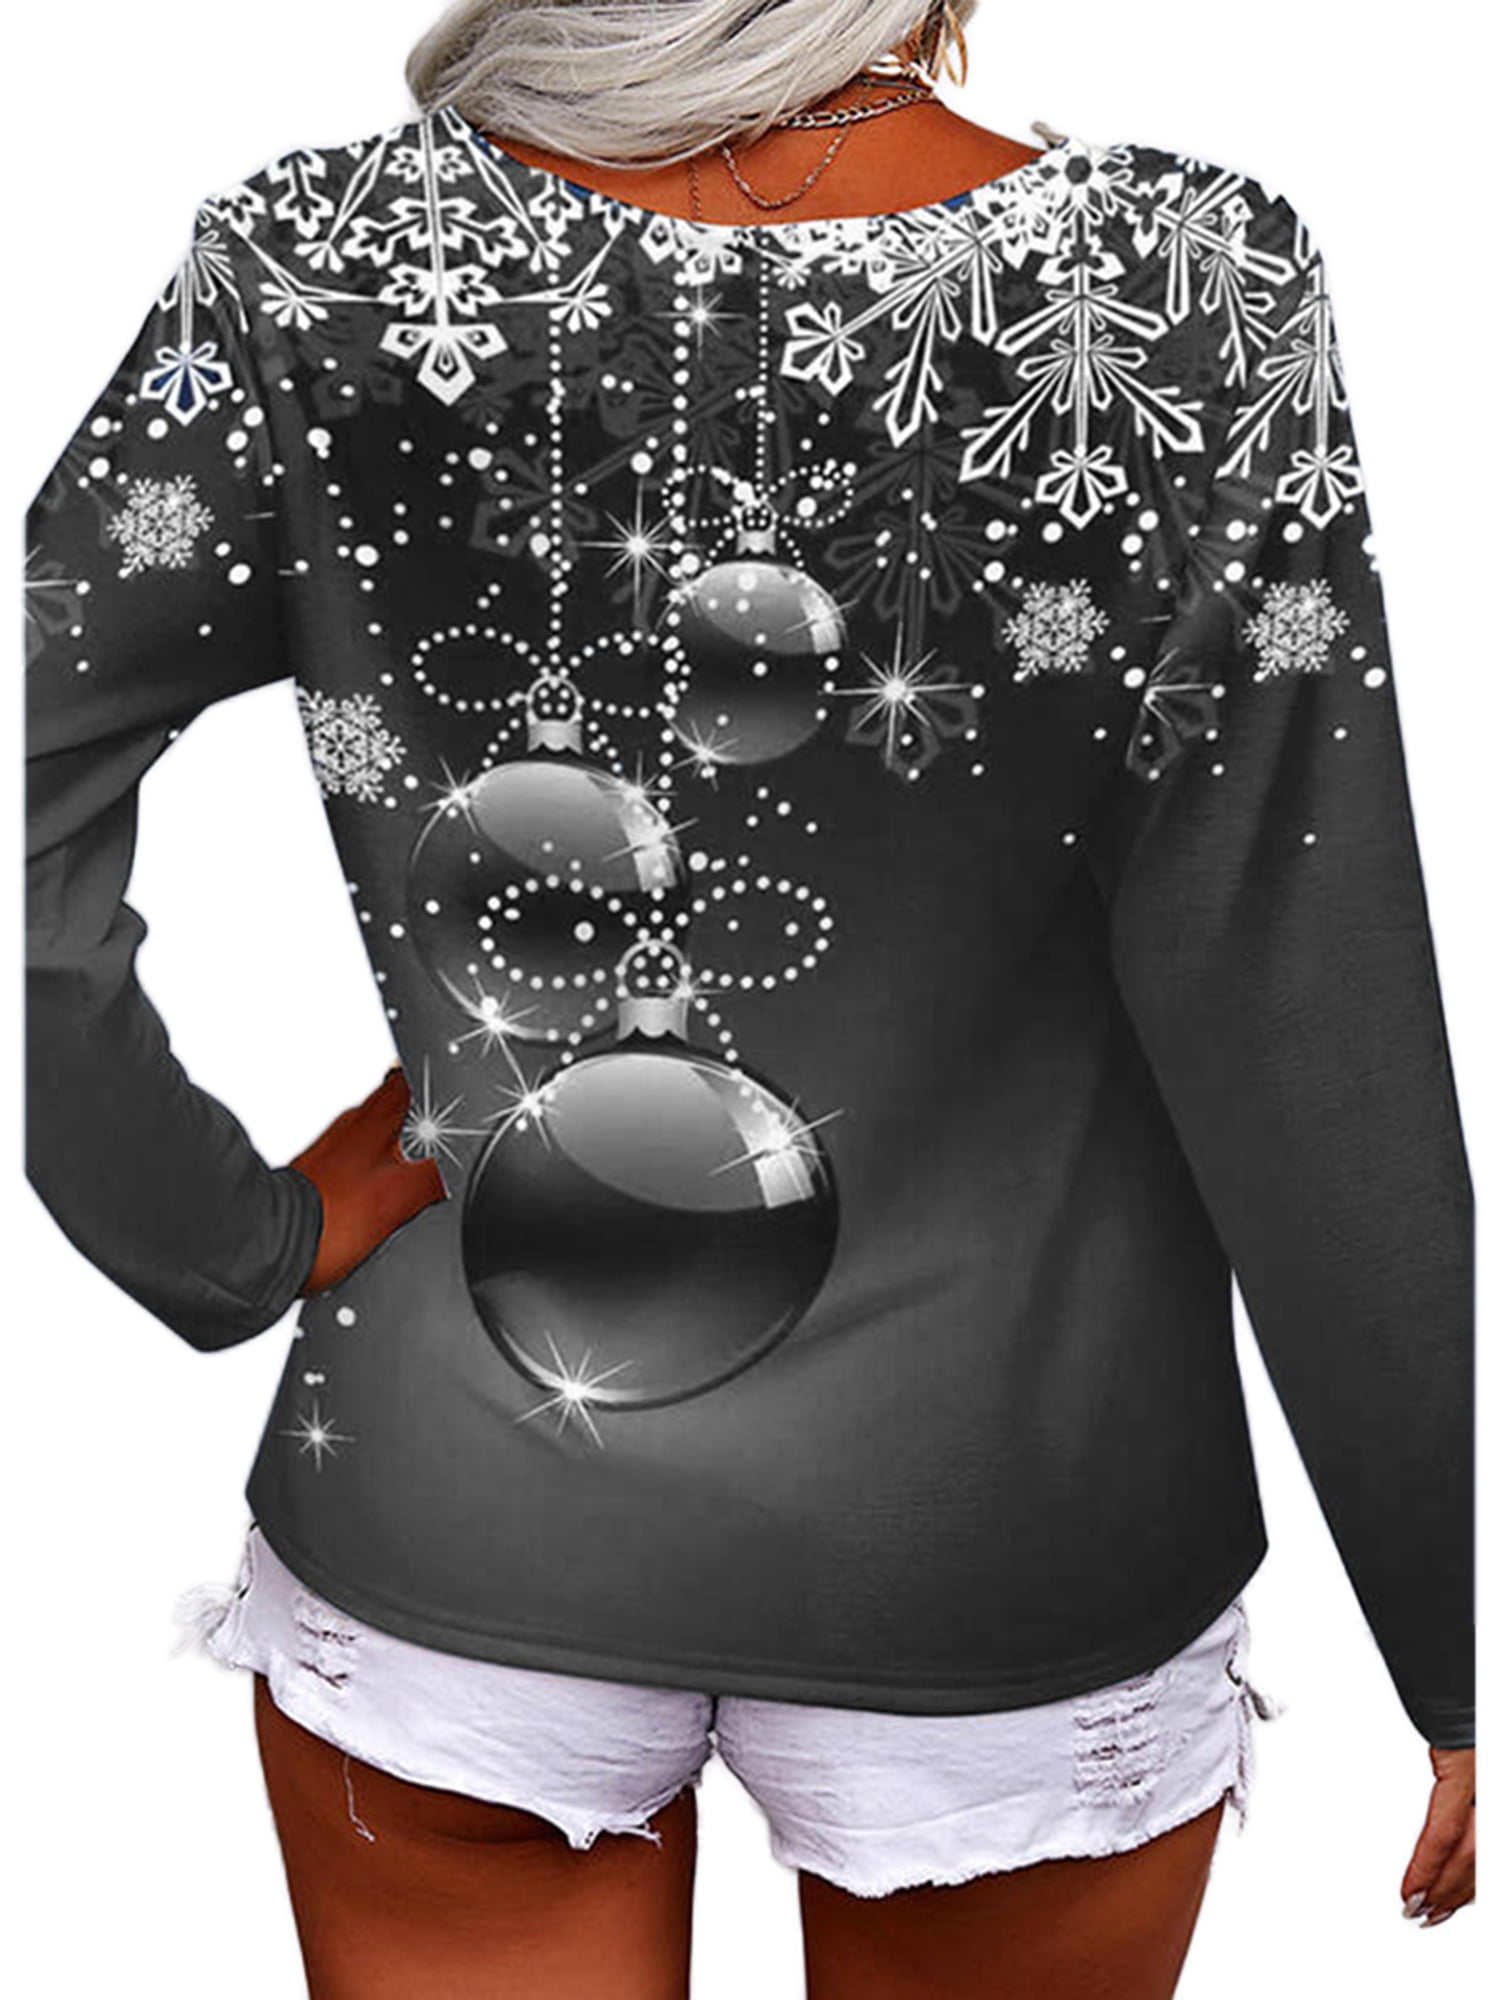 IEPOFG Long Sleeve Shirts for Women Fashion V-neck Irregular Splicing Cute  Christmas Print Loose Fit Comfy Pullover Tops